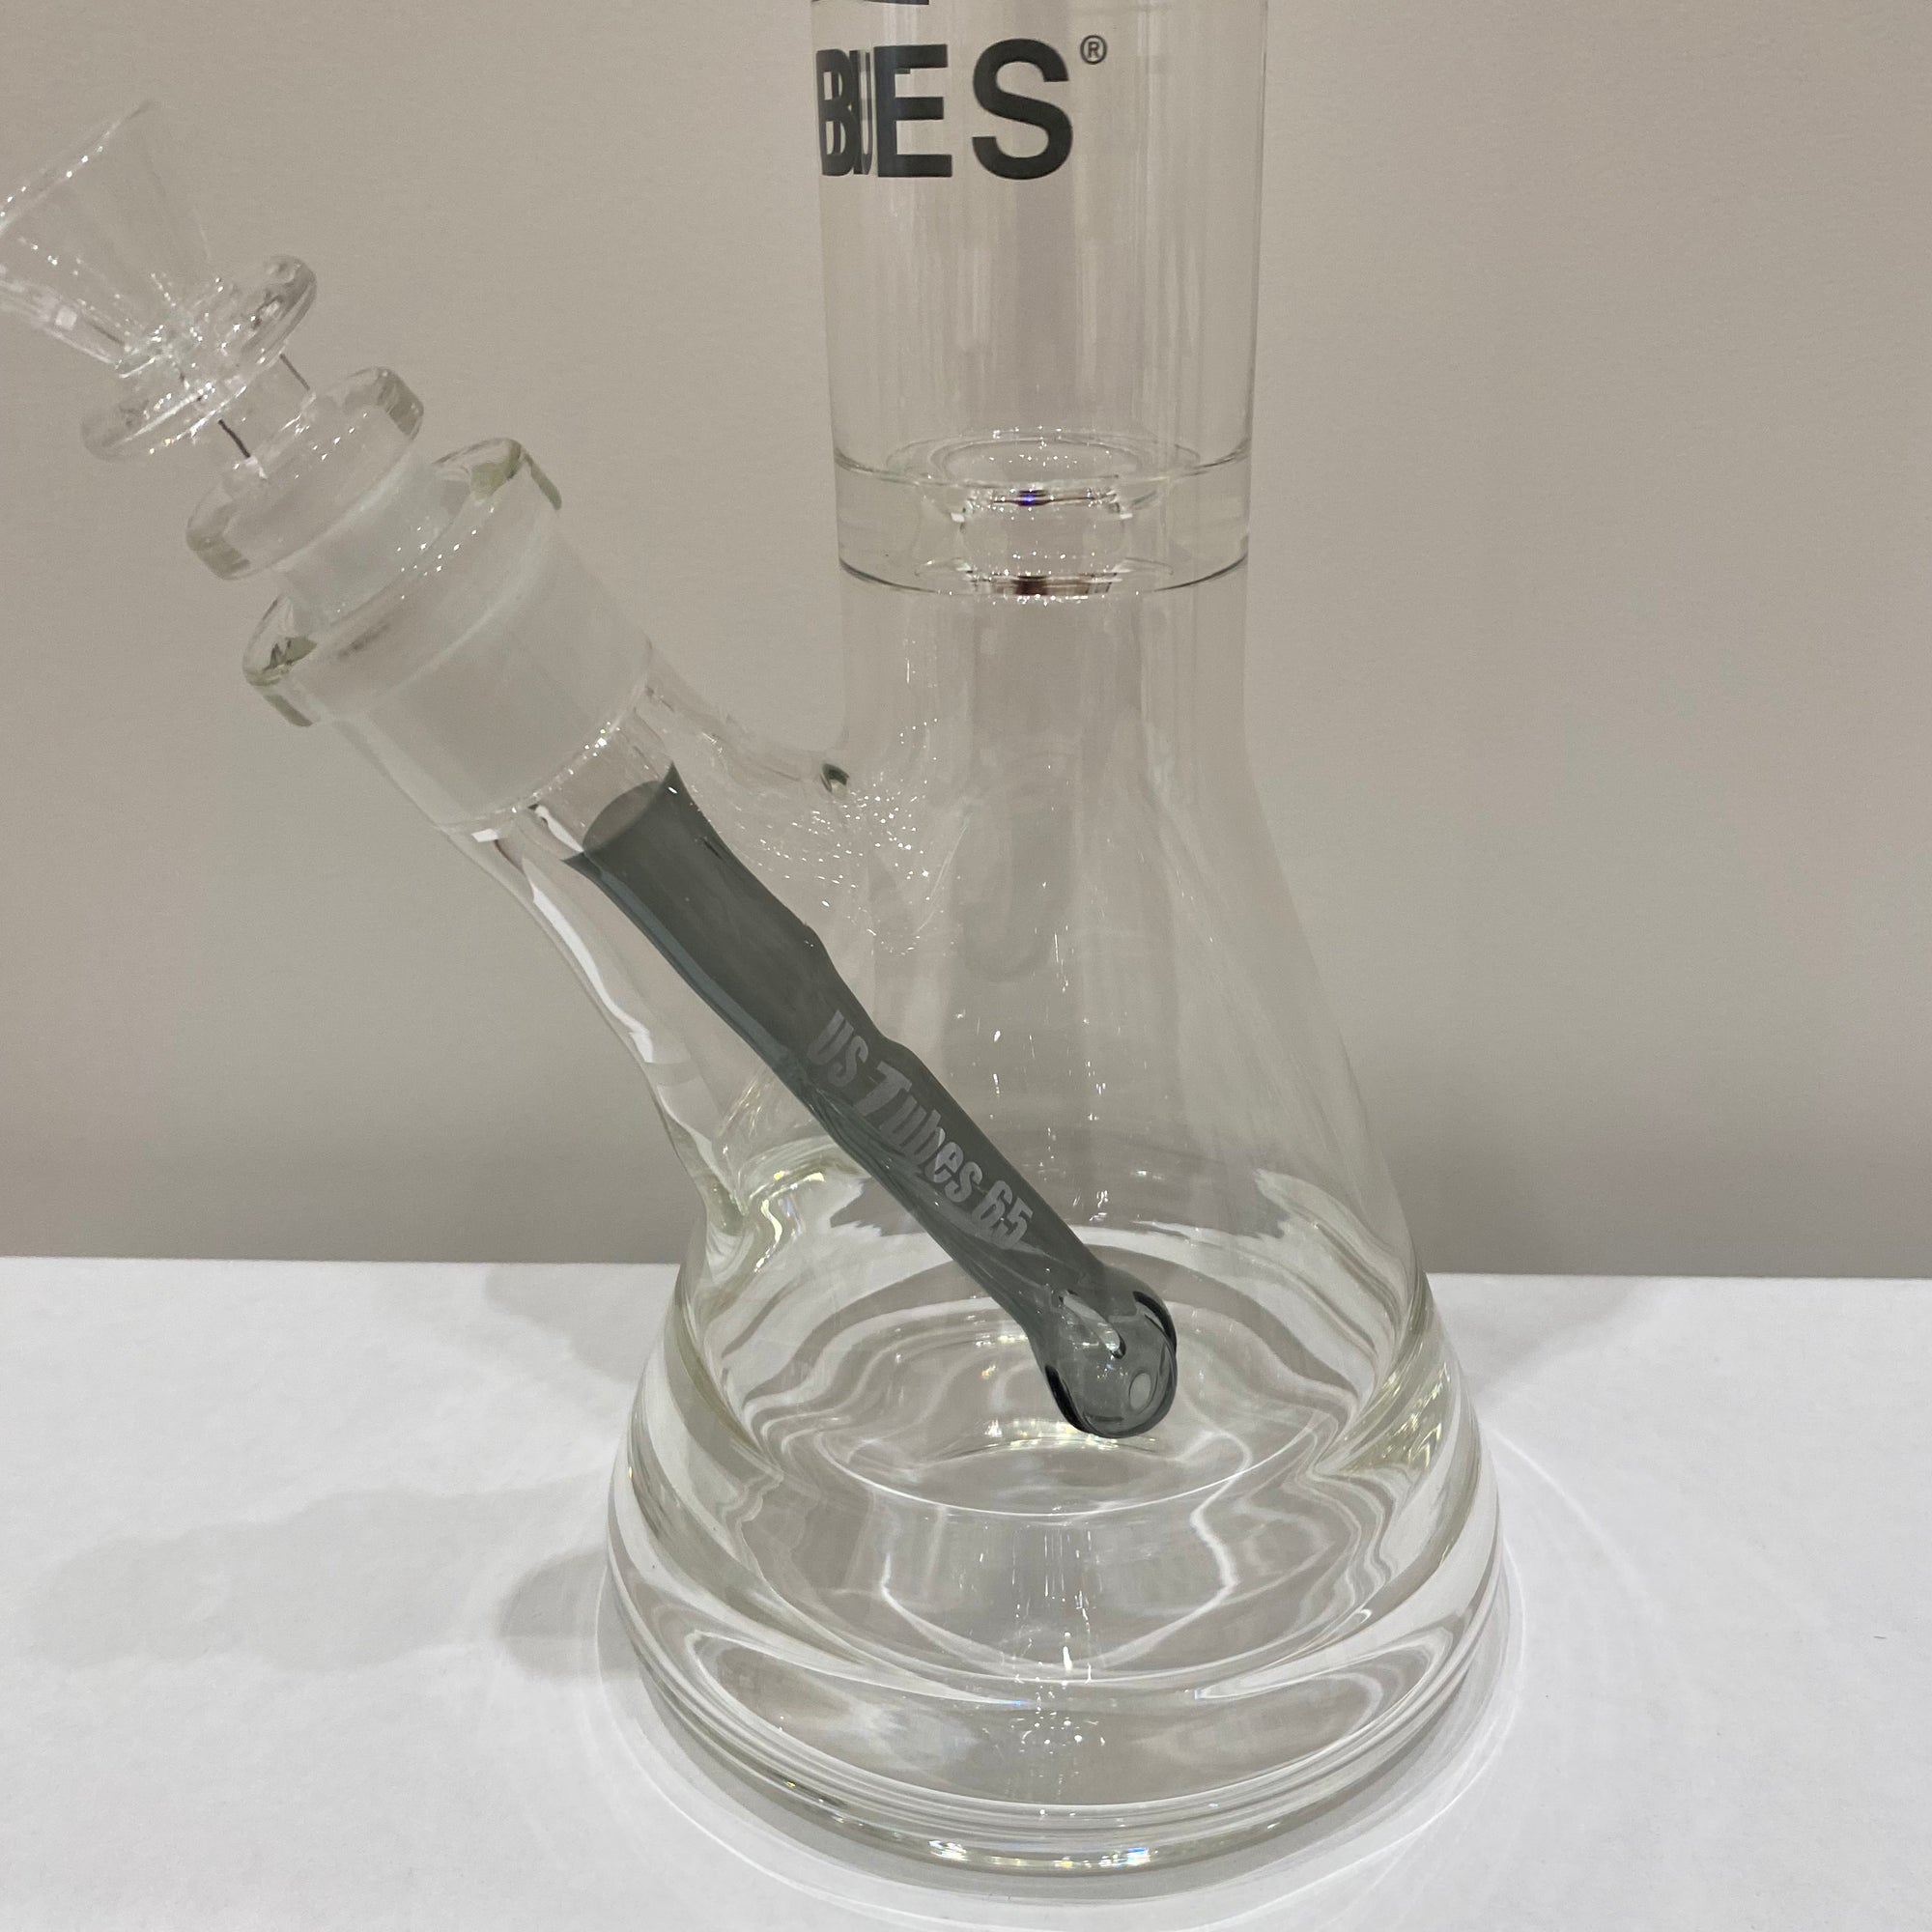 US Tubes Beaker 55, 17 Inch, Constriction, 24mm Joint